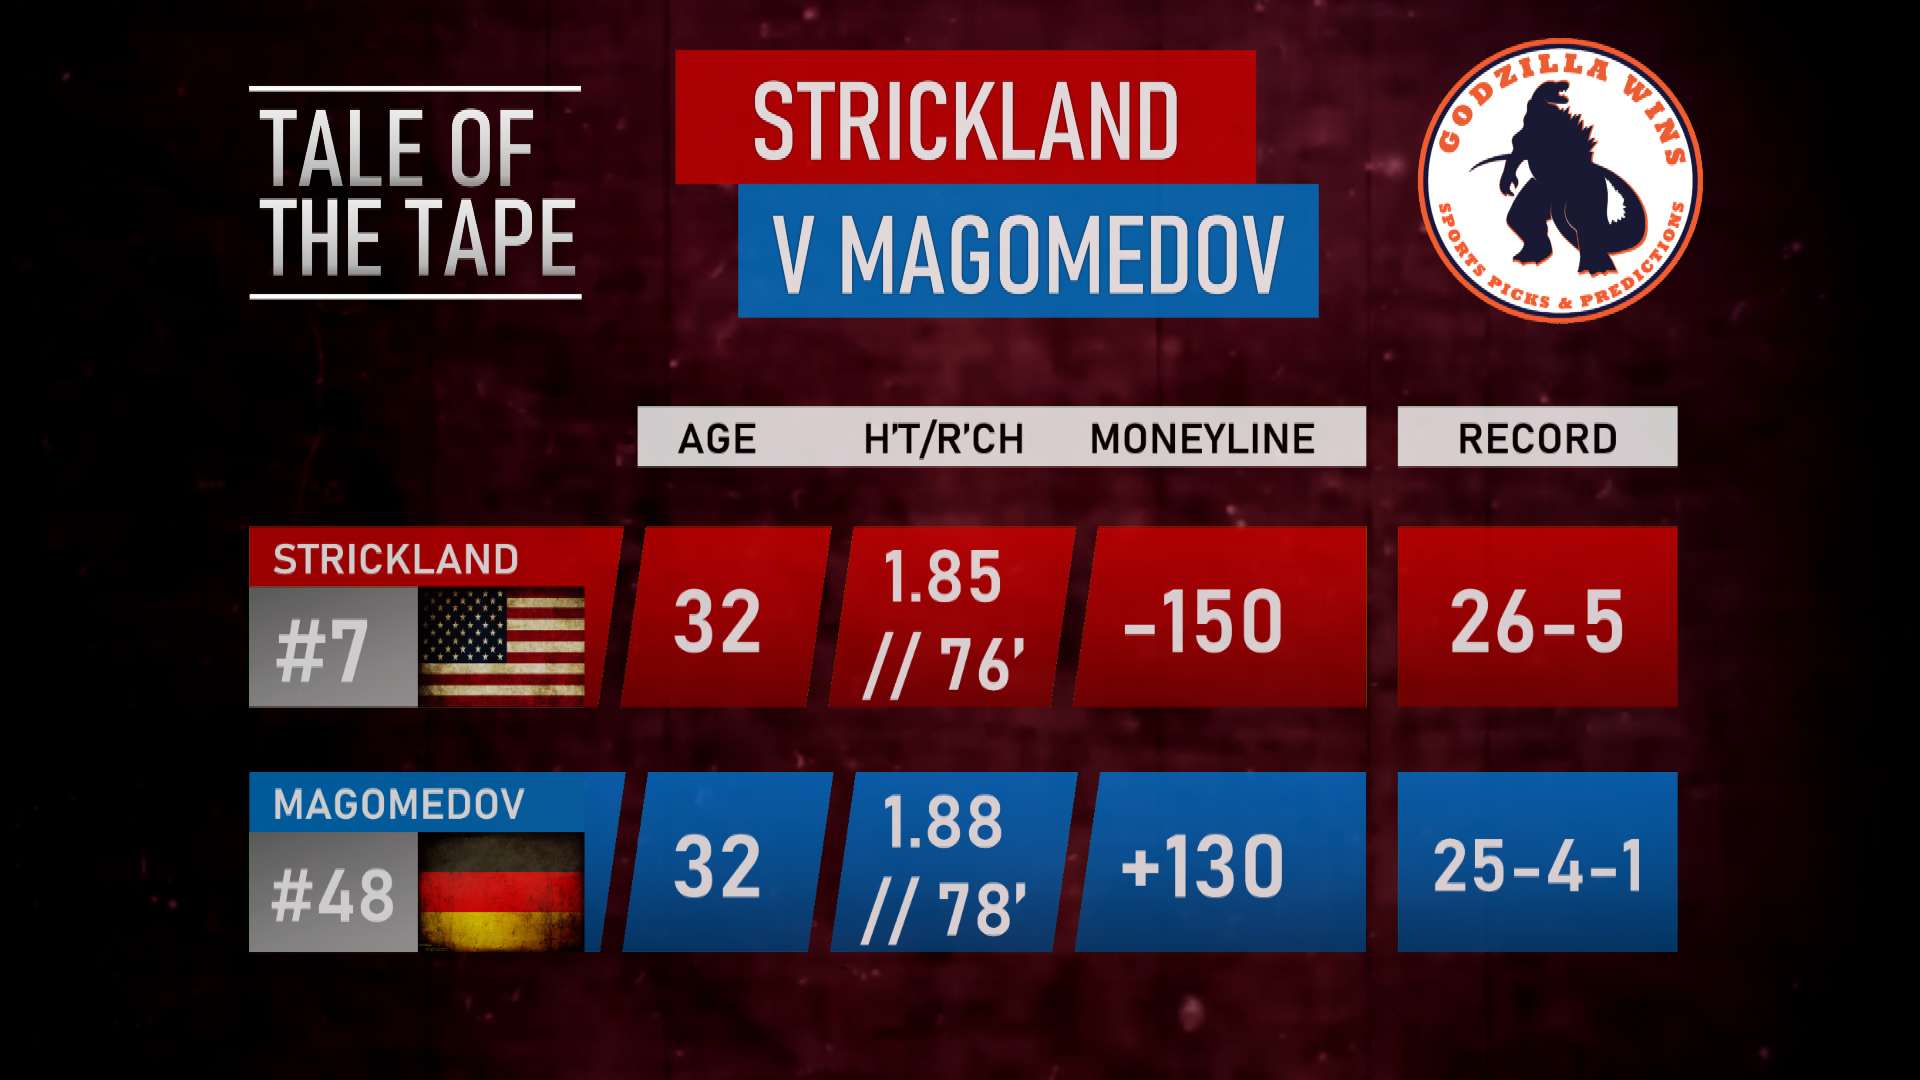 UFC Vegas 76 Main Event: Tale of the tape